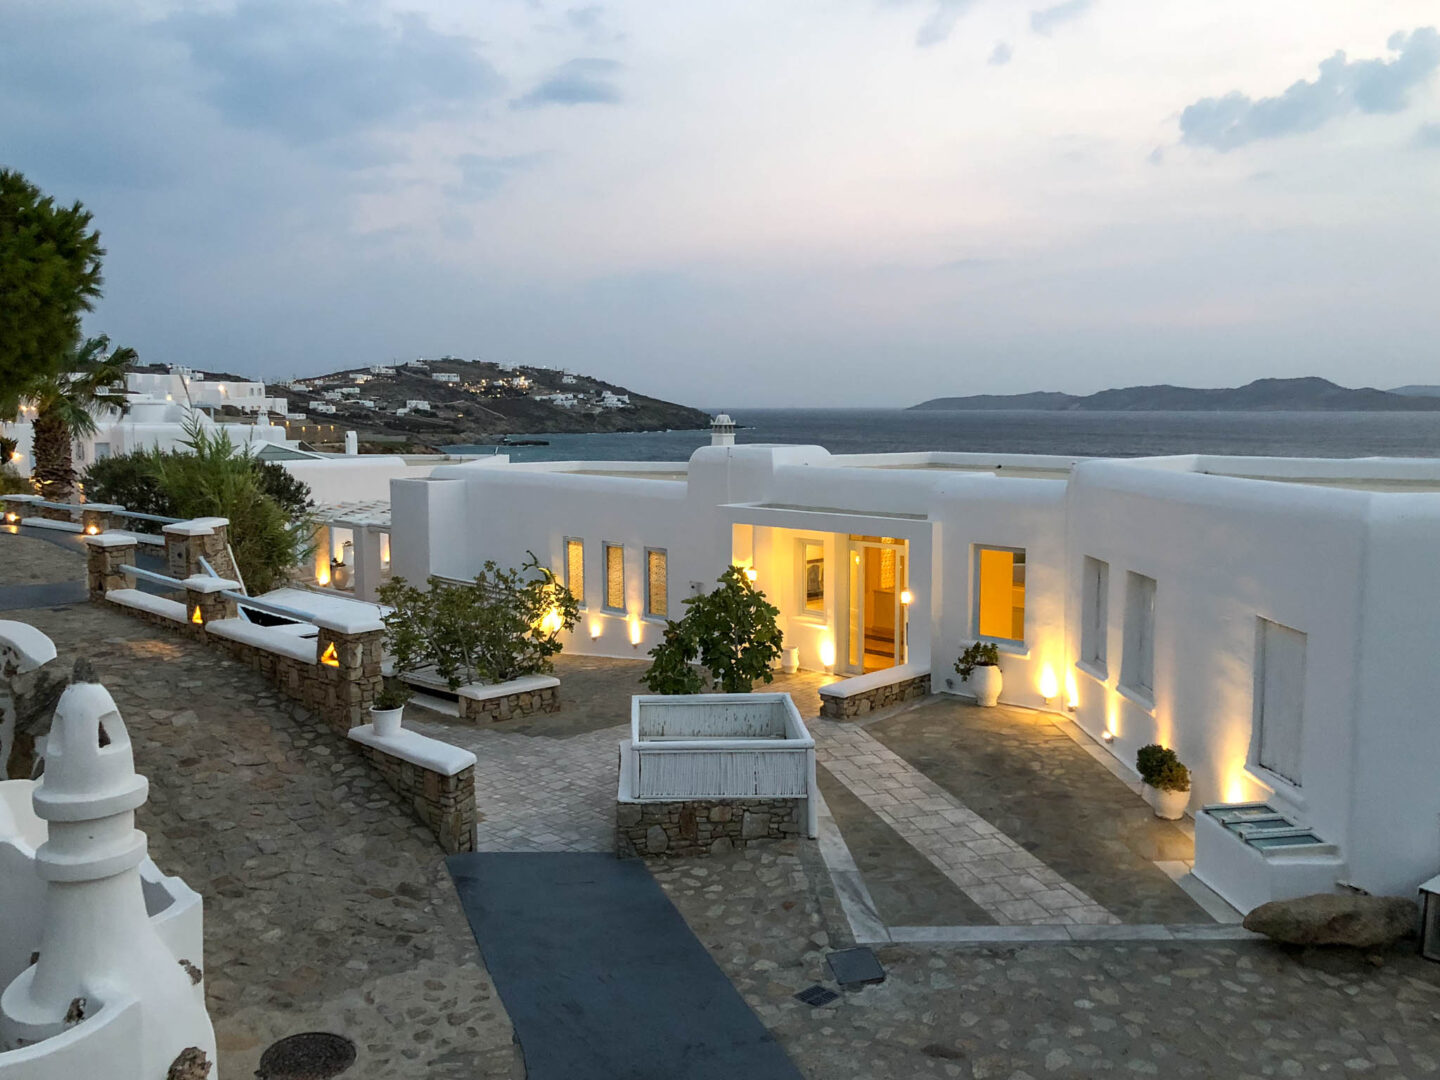 Mykonos island hopping: 5 spectacular itineraries to easily do on your own